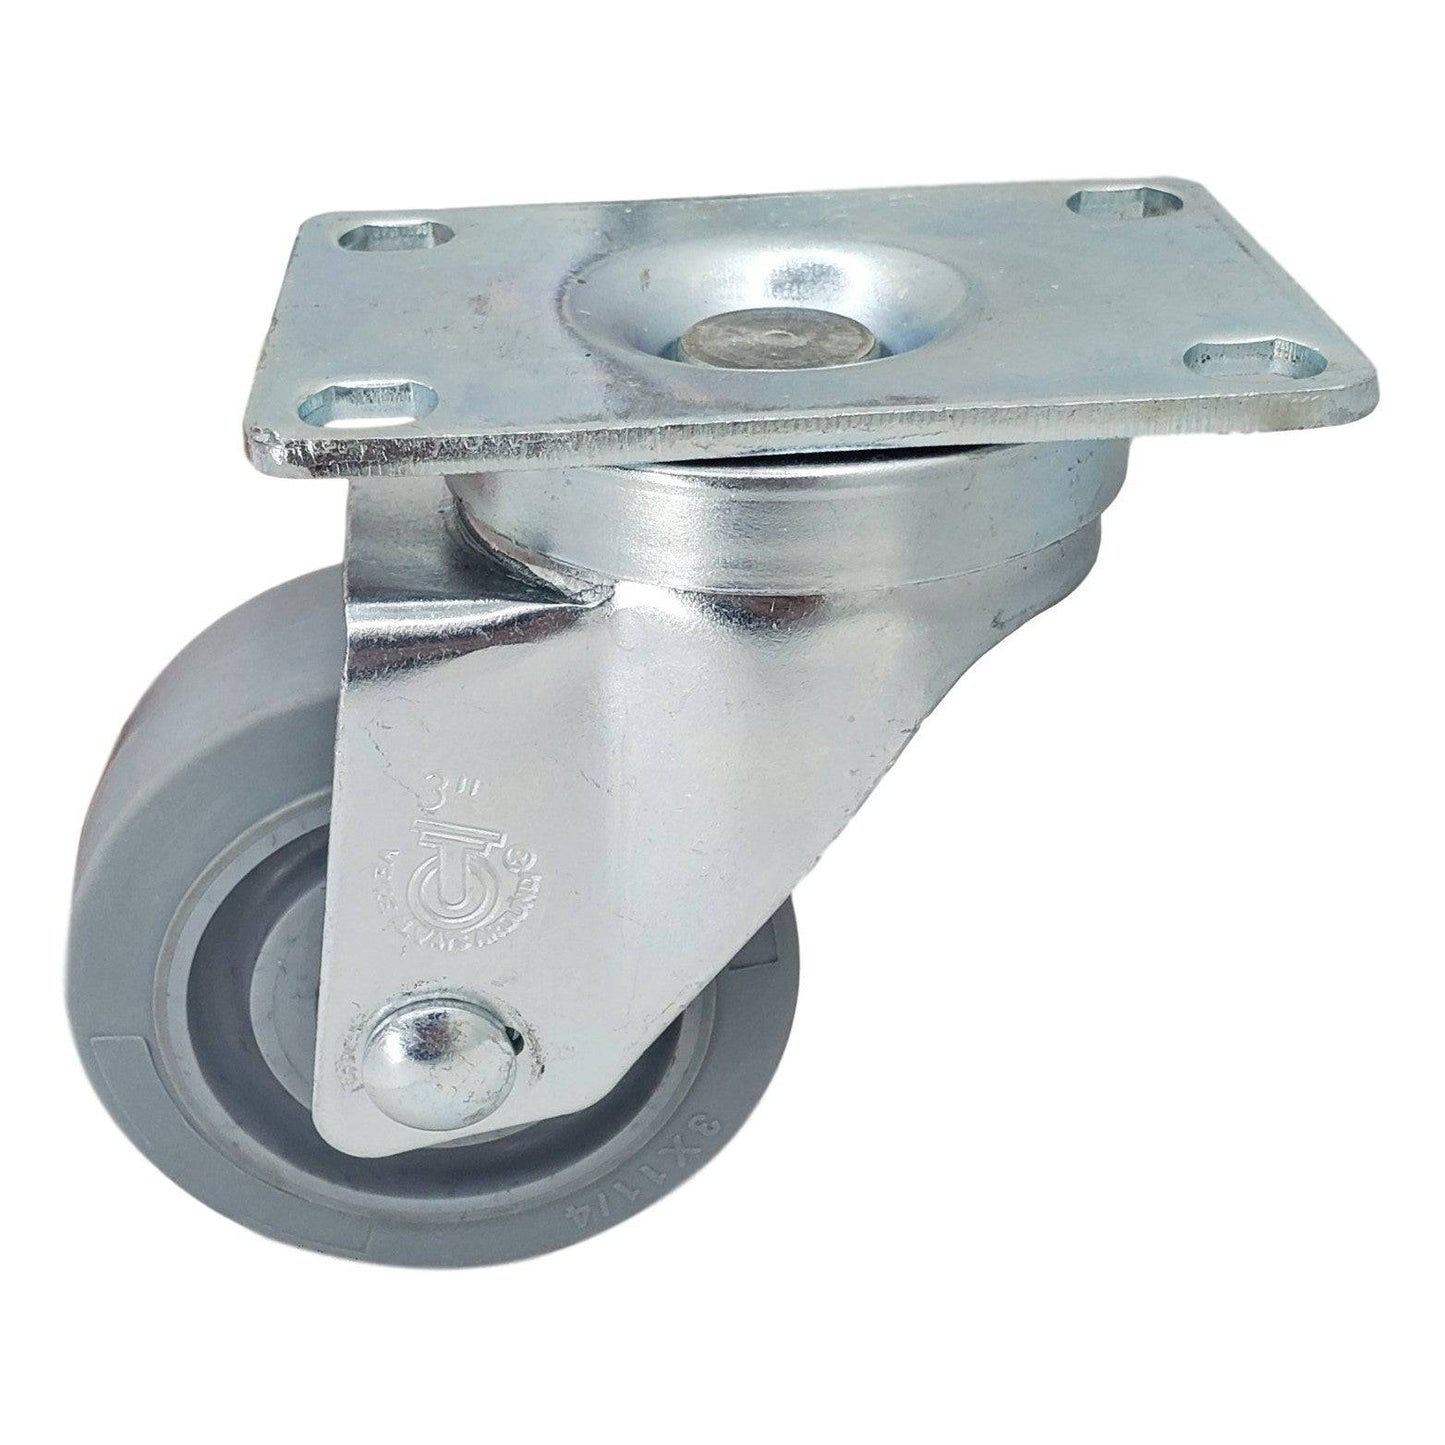 3" x 1-1/4" Nomadic Wheel Swivel Caster - 300 lbs. Capacity - Durable Superior Casters